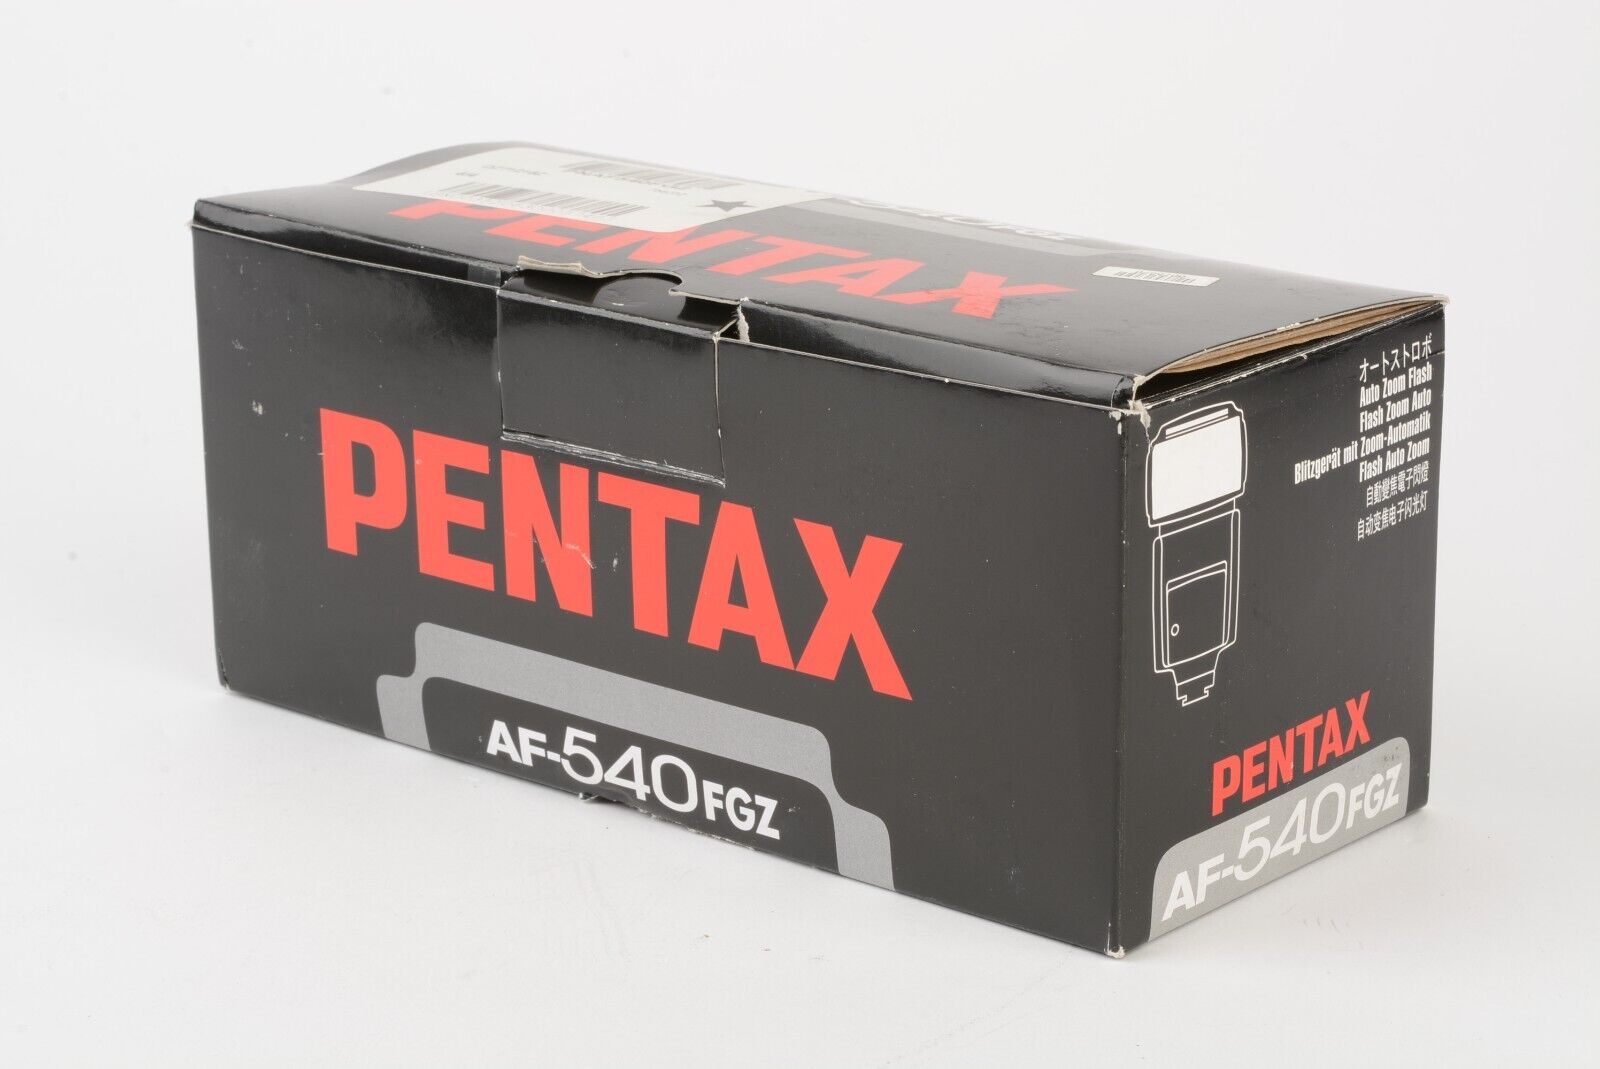 EXC++ PENTAX AF540FGZ SHOE MOUNT FLASH, BOXED, VERY CLEAN